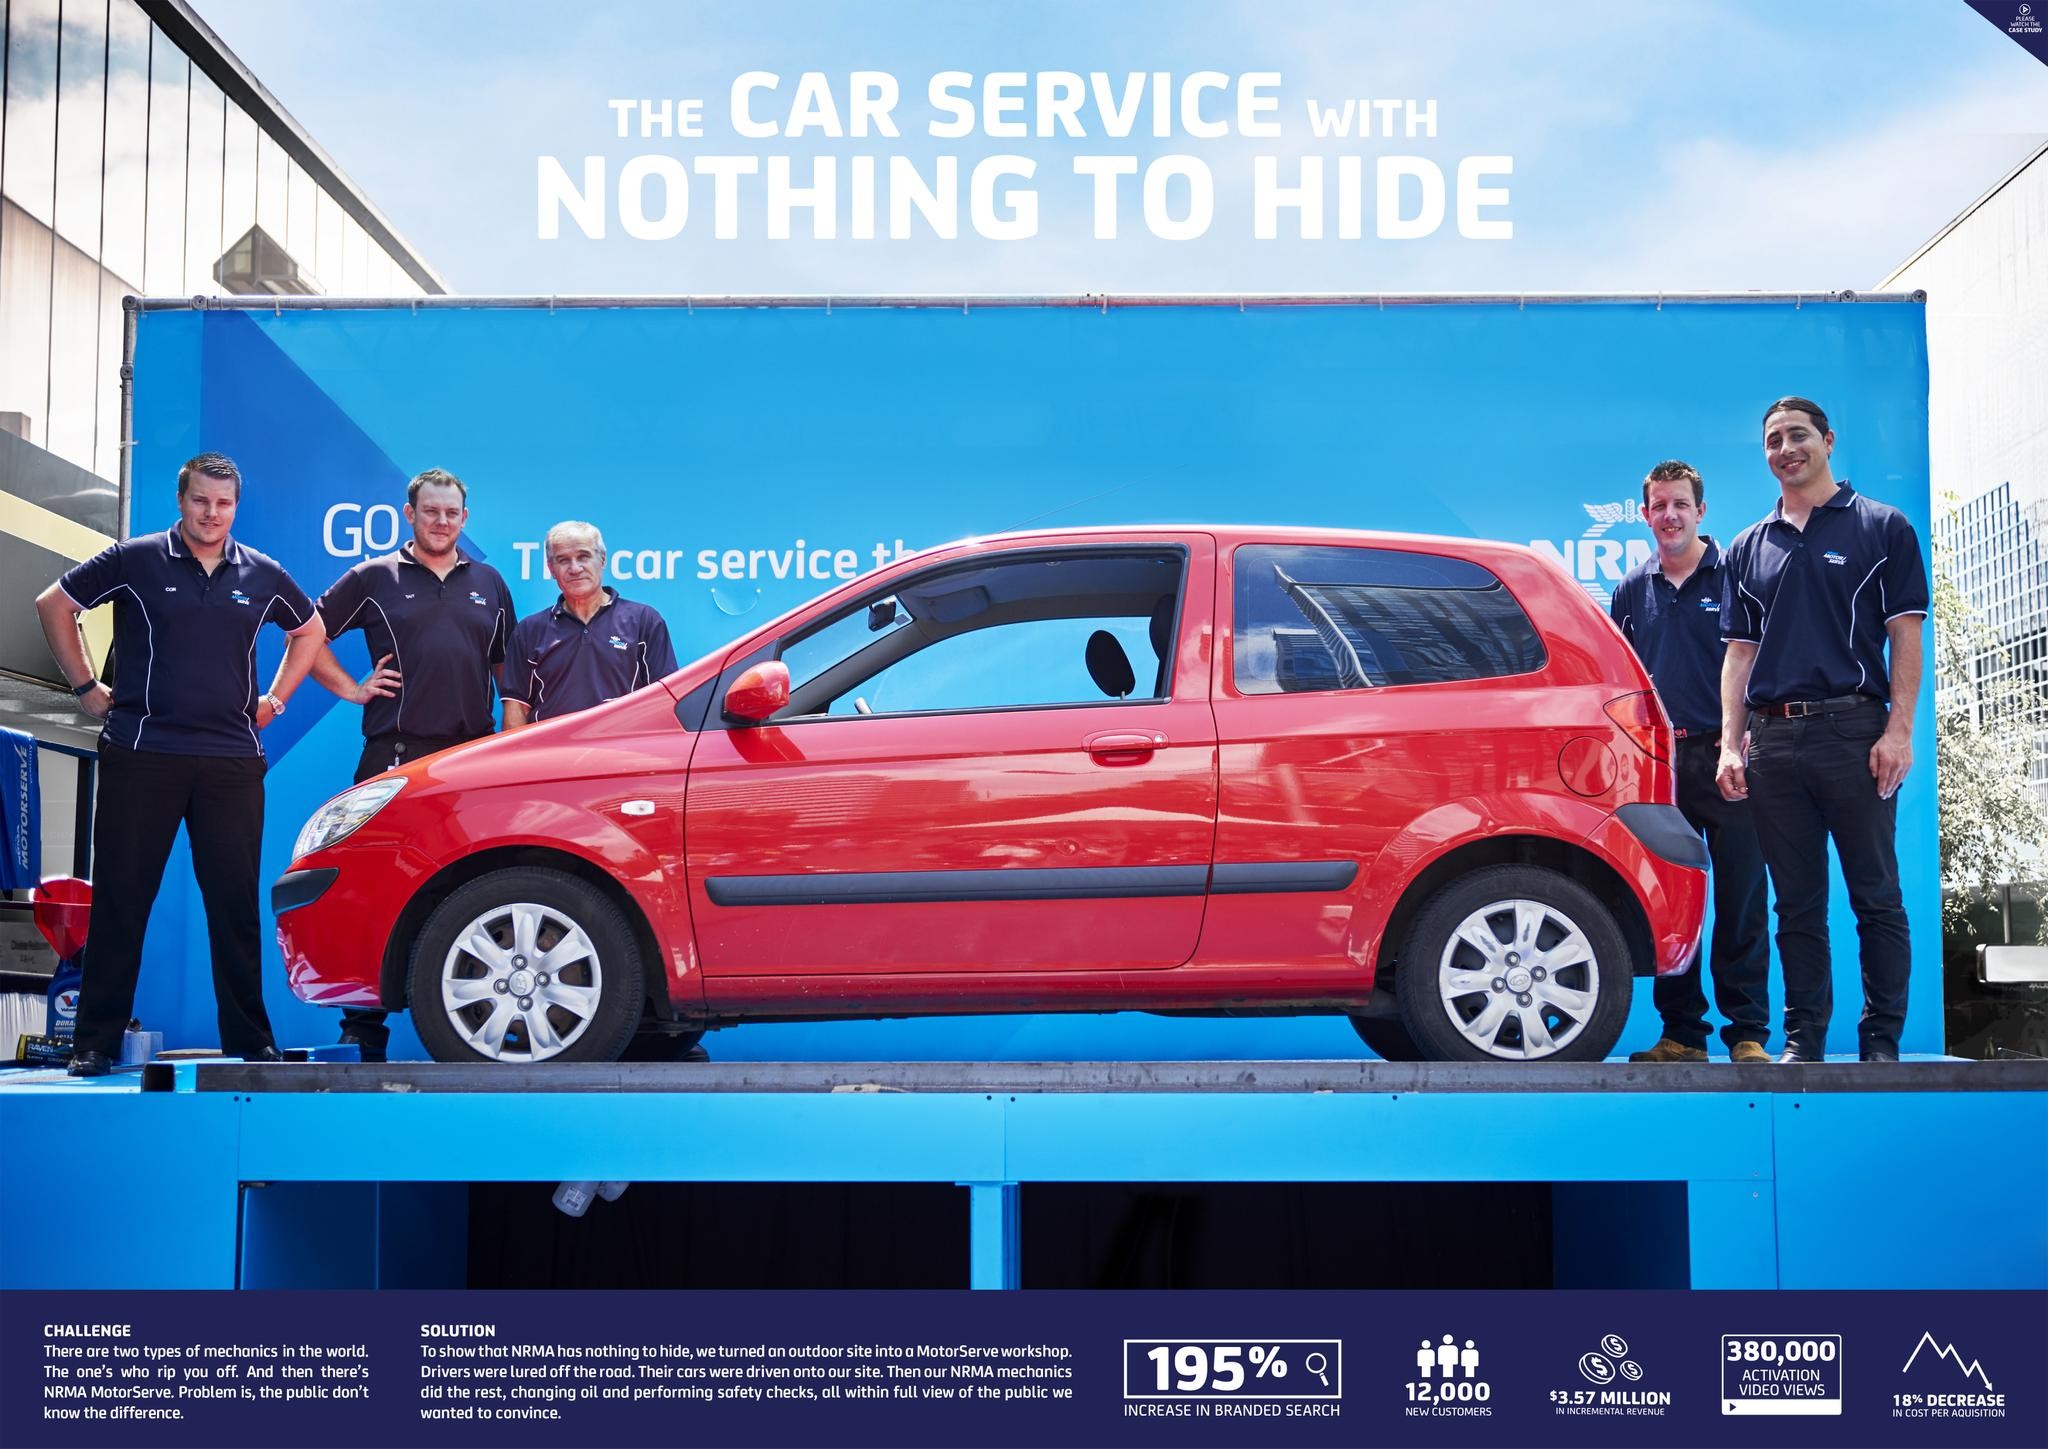 The car service with nothing to hide